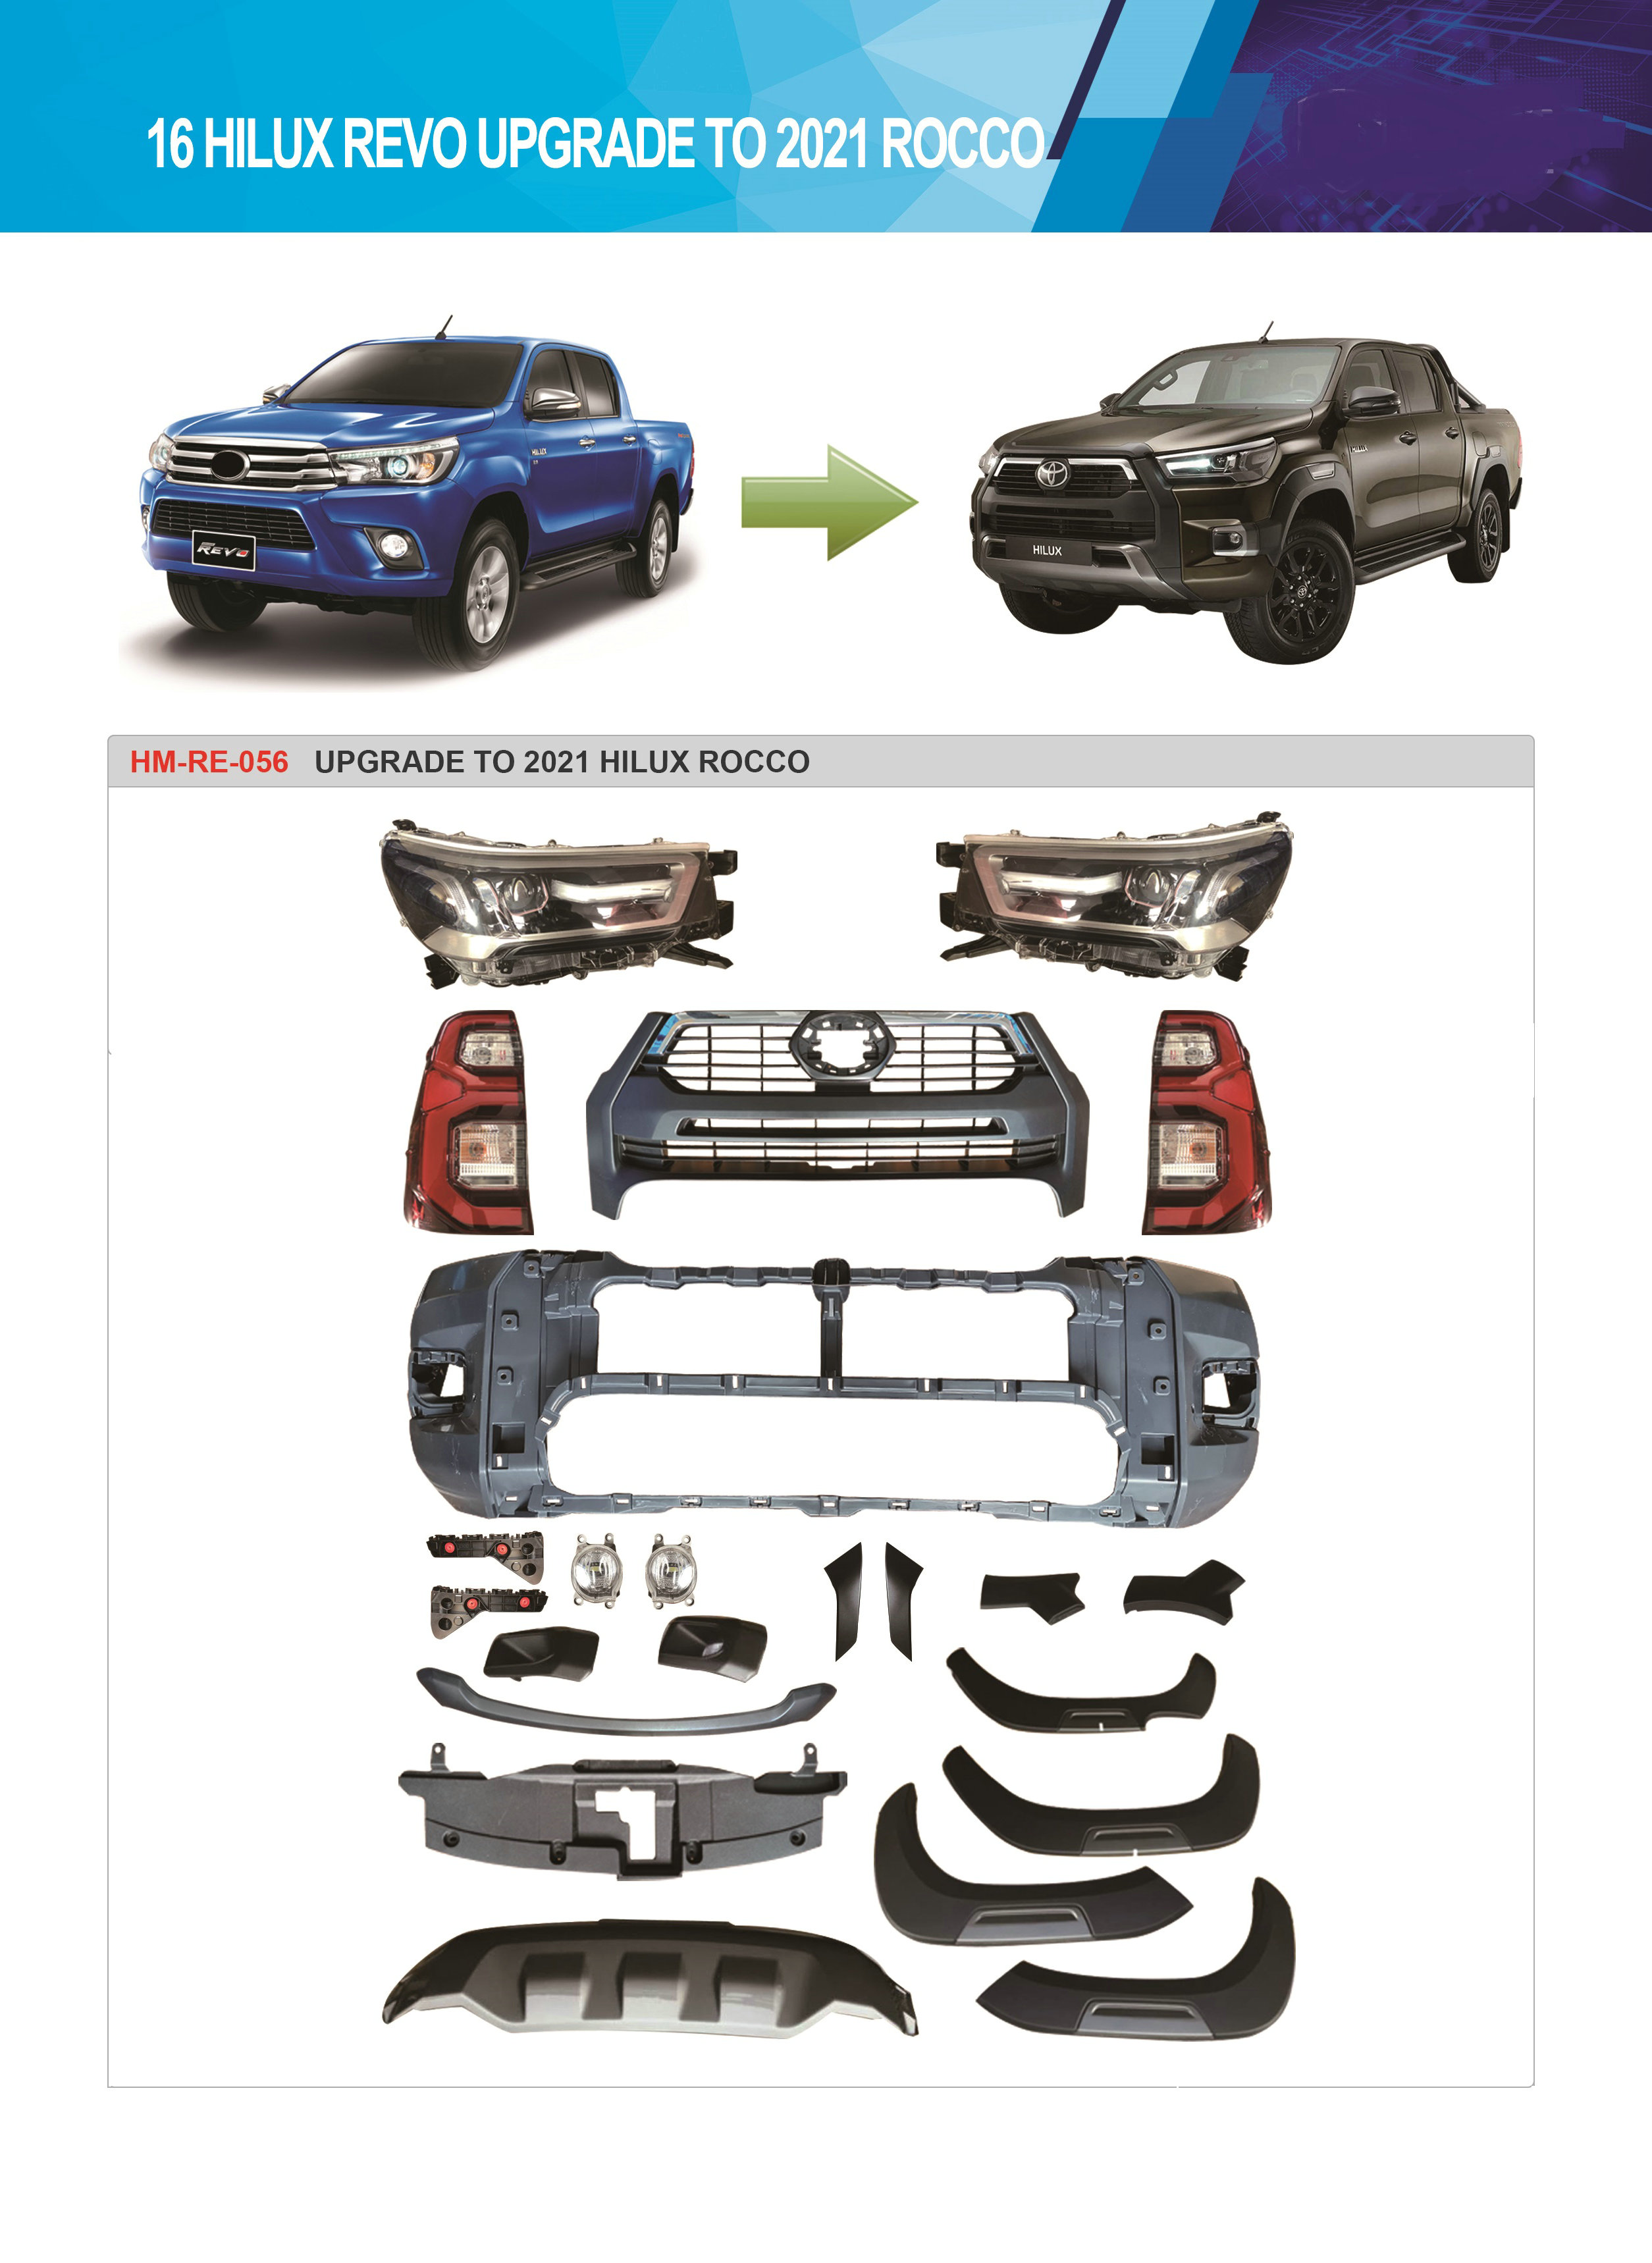 16 Hilux Revo Upgrade To 21 Rocco Featured Image